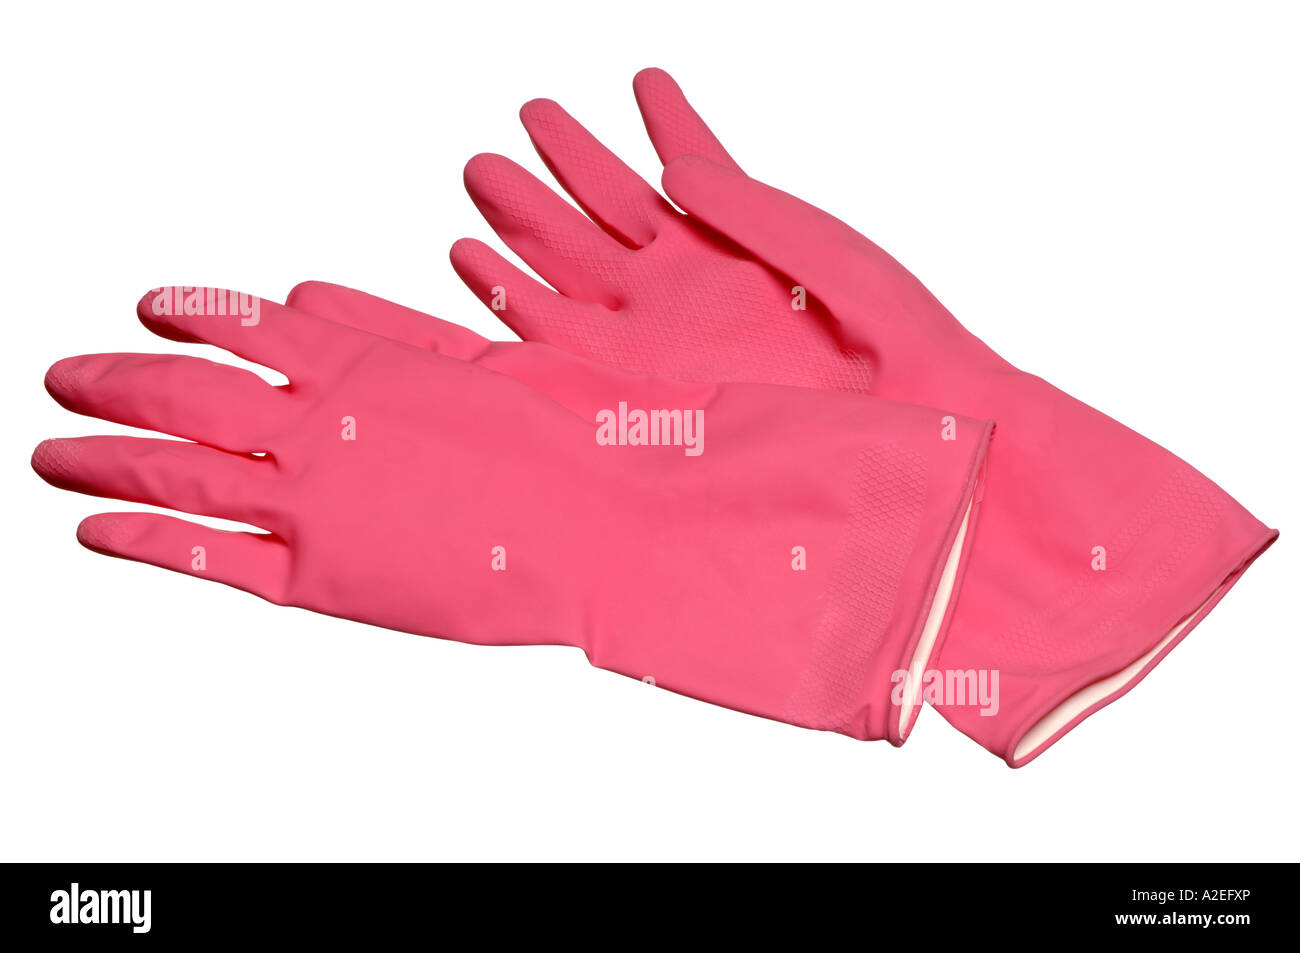 Pink rubber gloves Stock Photo